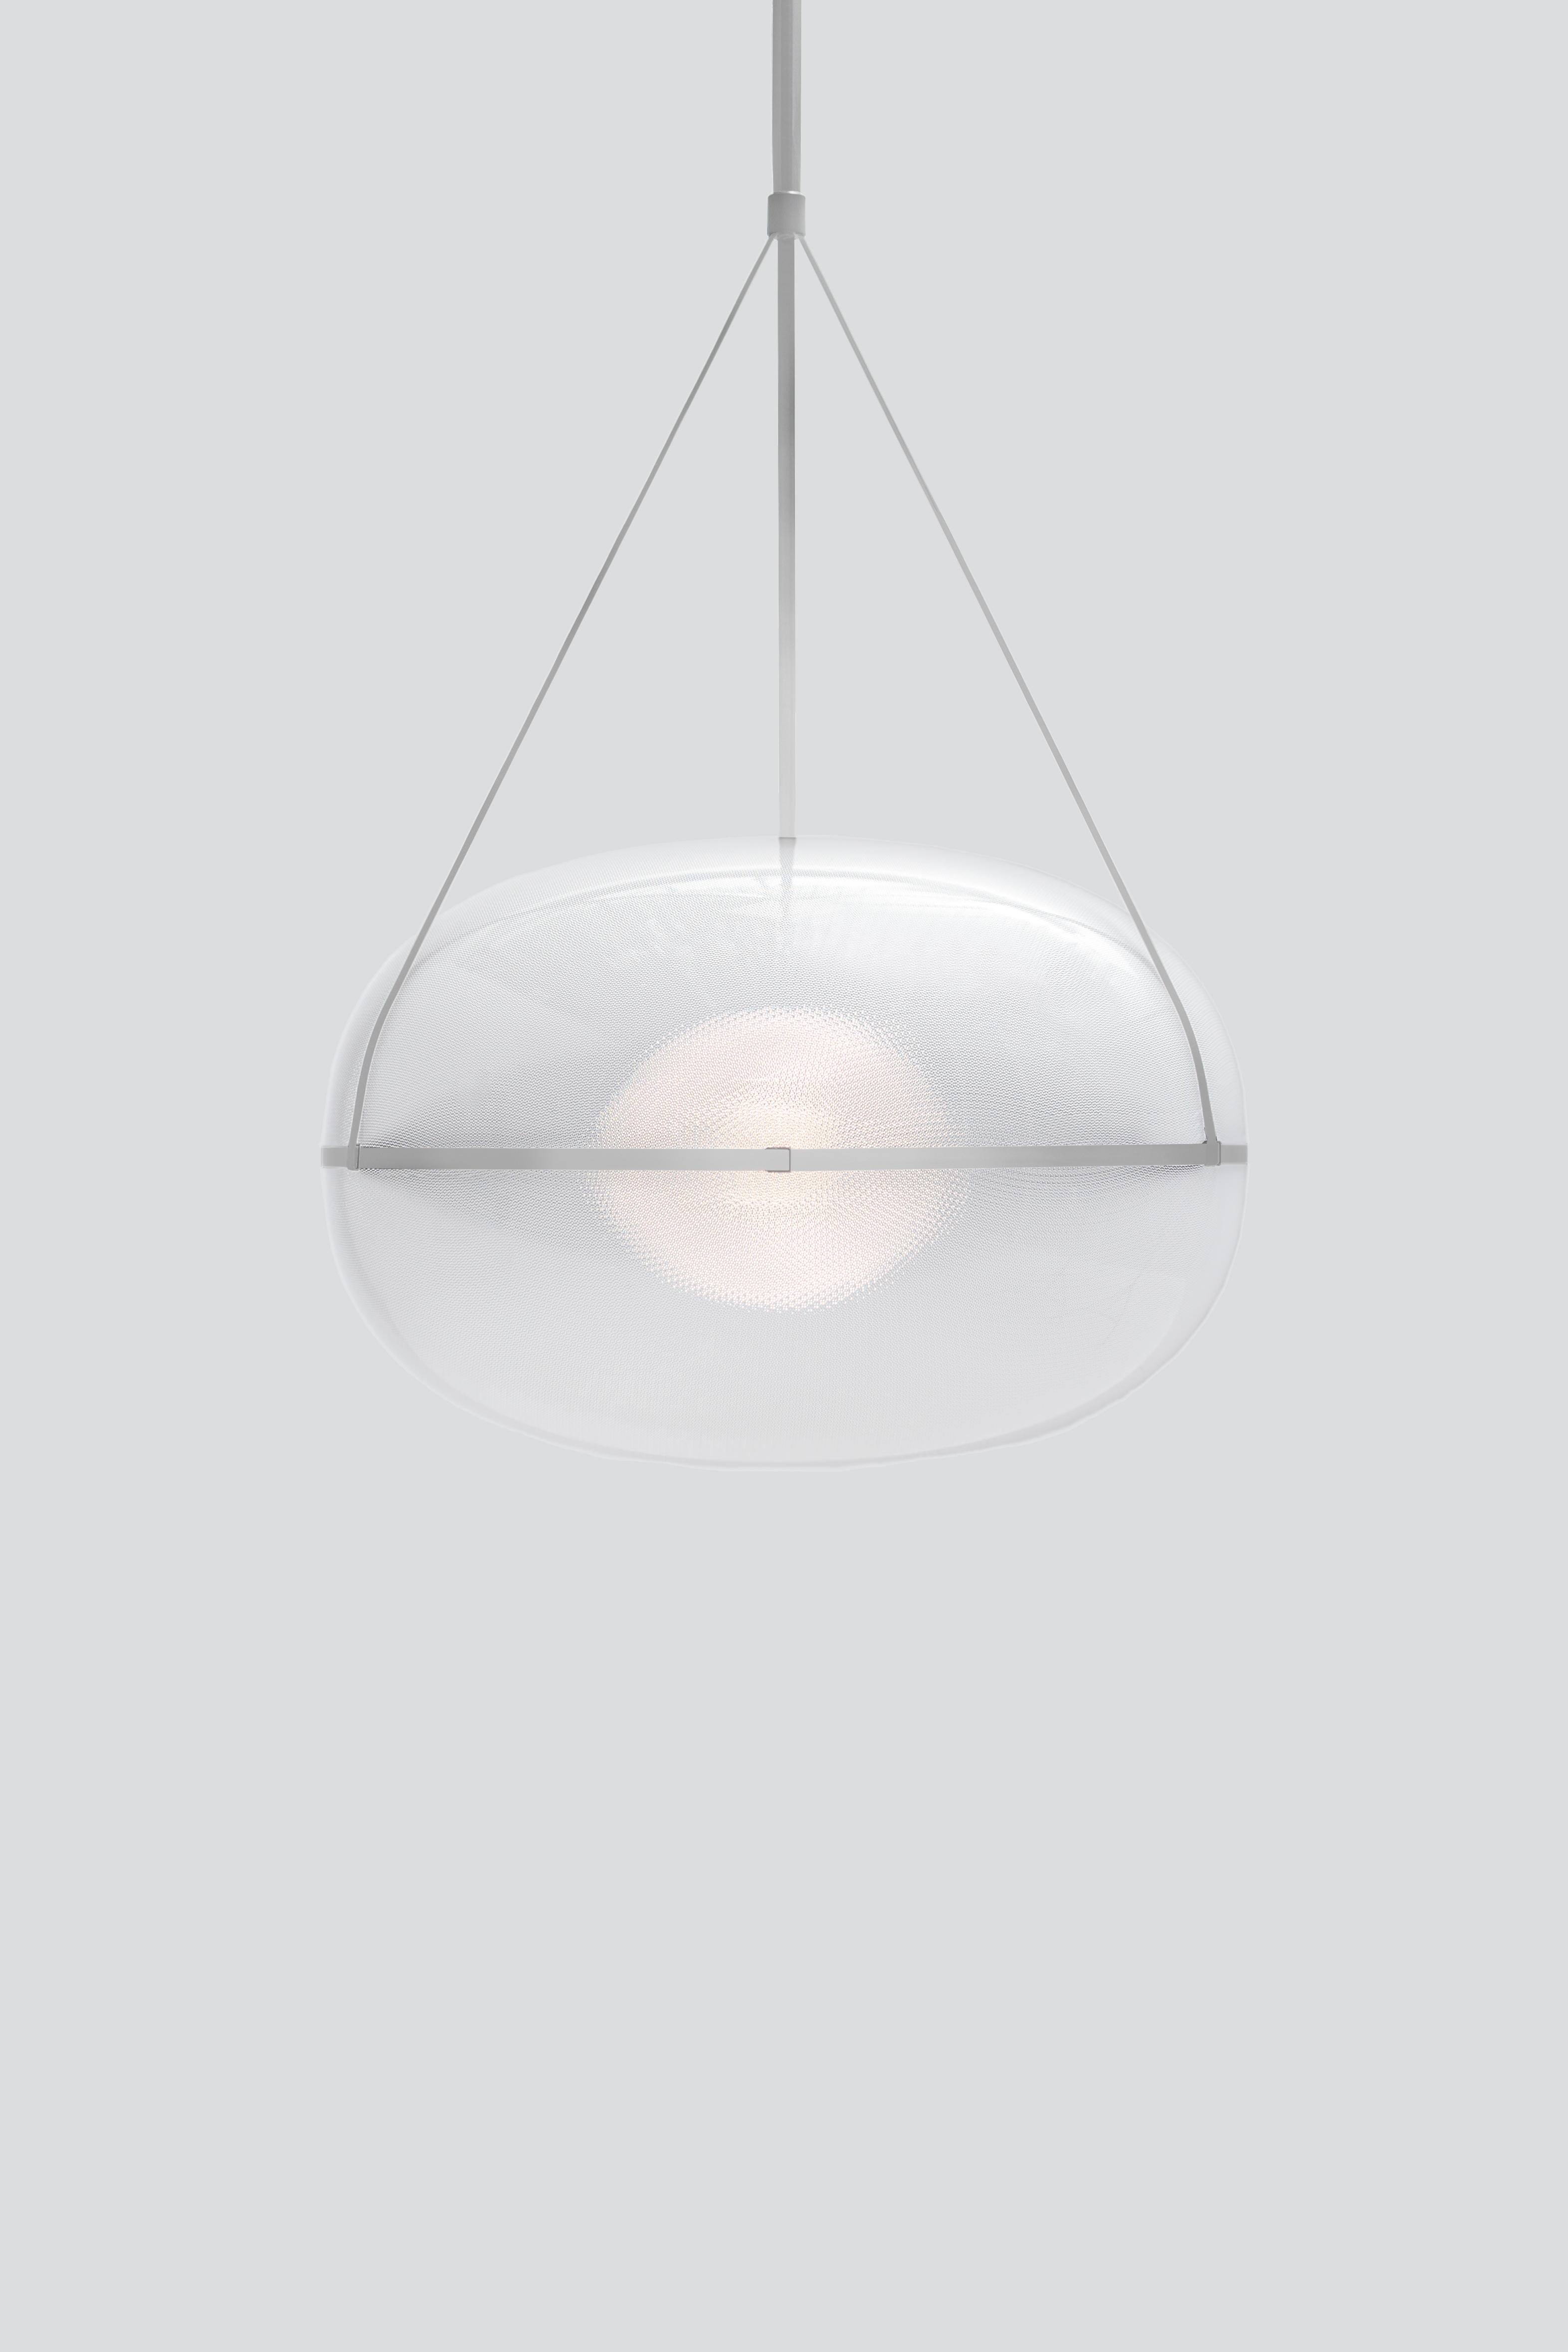 Canadian Contemporary Silver Pendant Lamp 'Iris', A/A For Sale